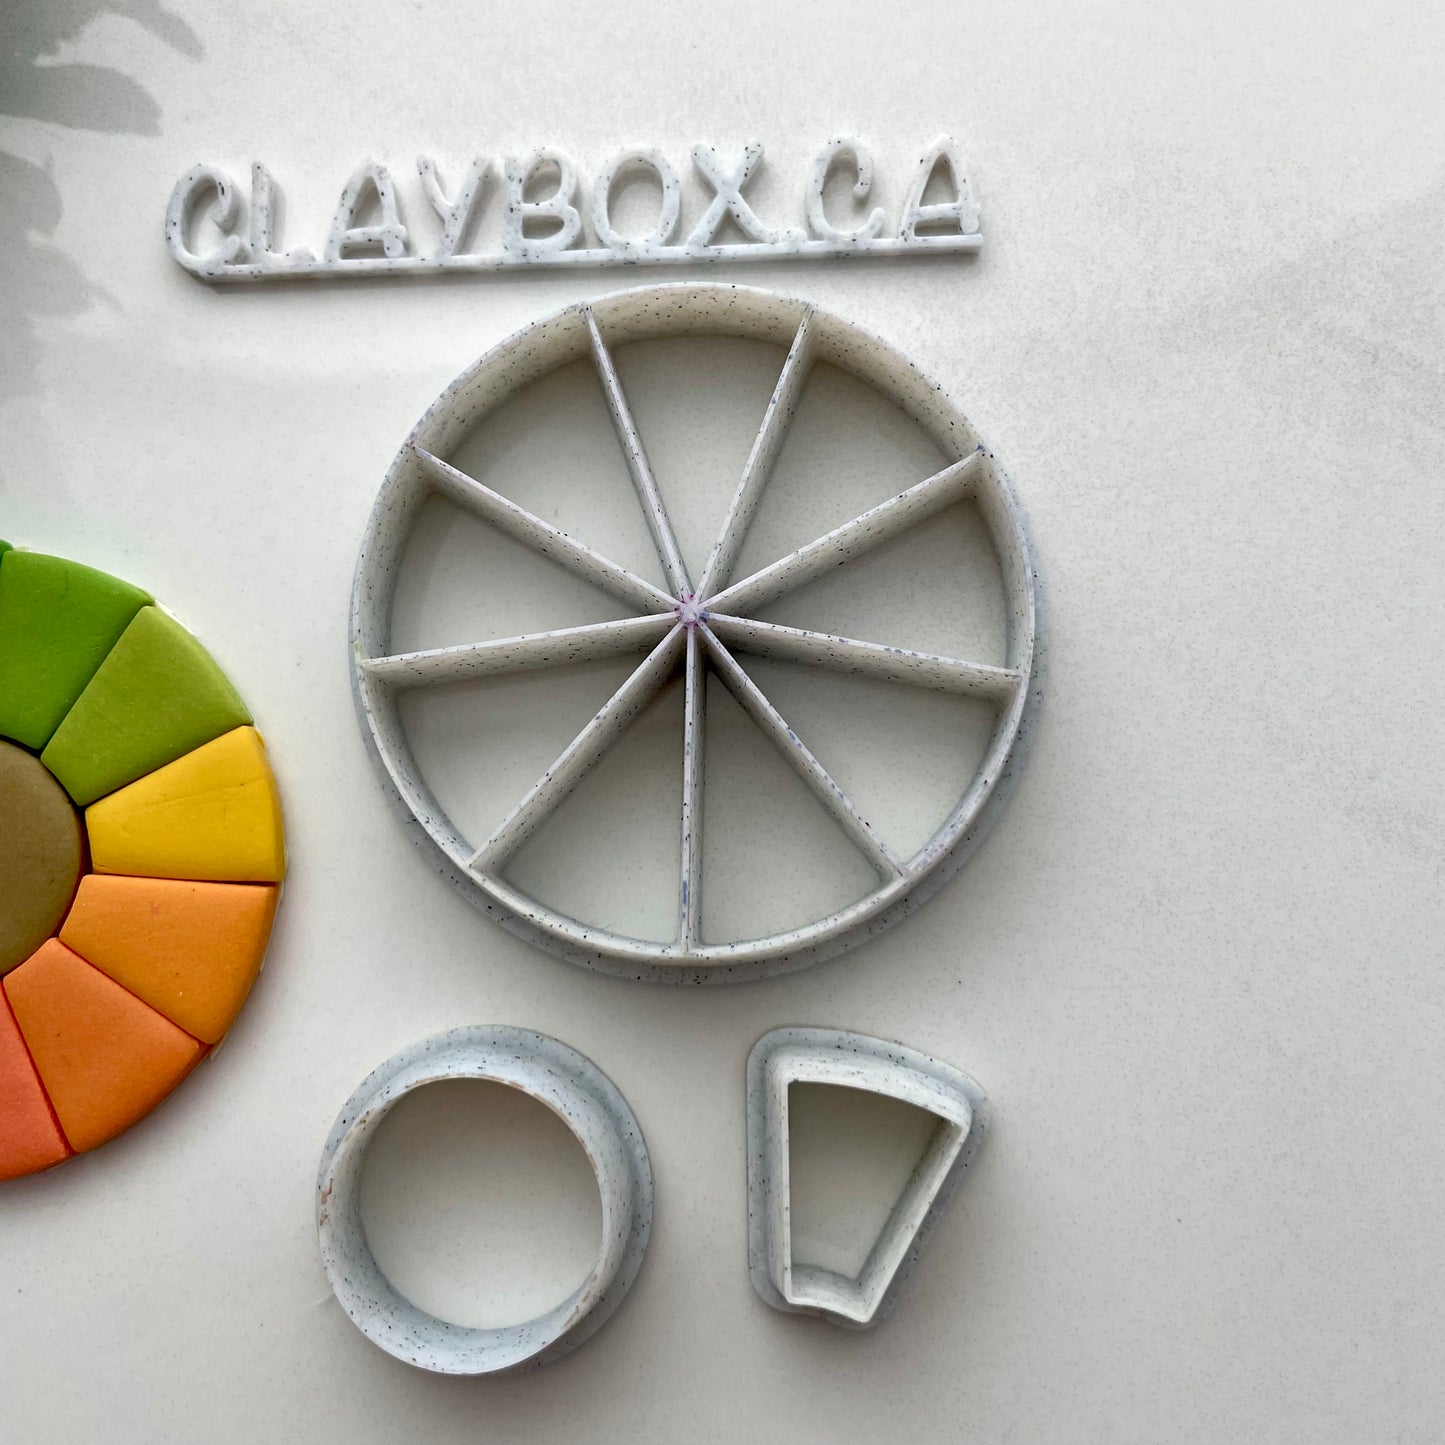 Color wheel cutter set - made for polymer clay